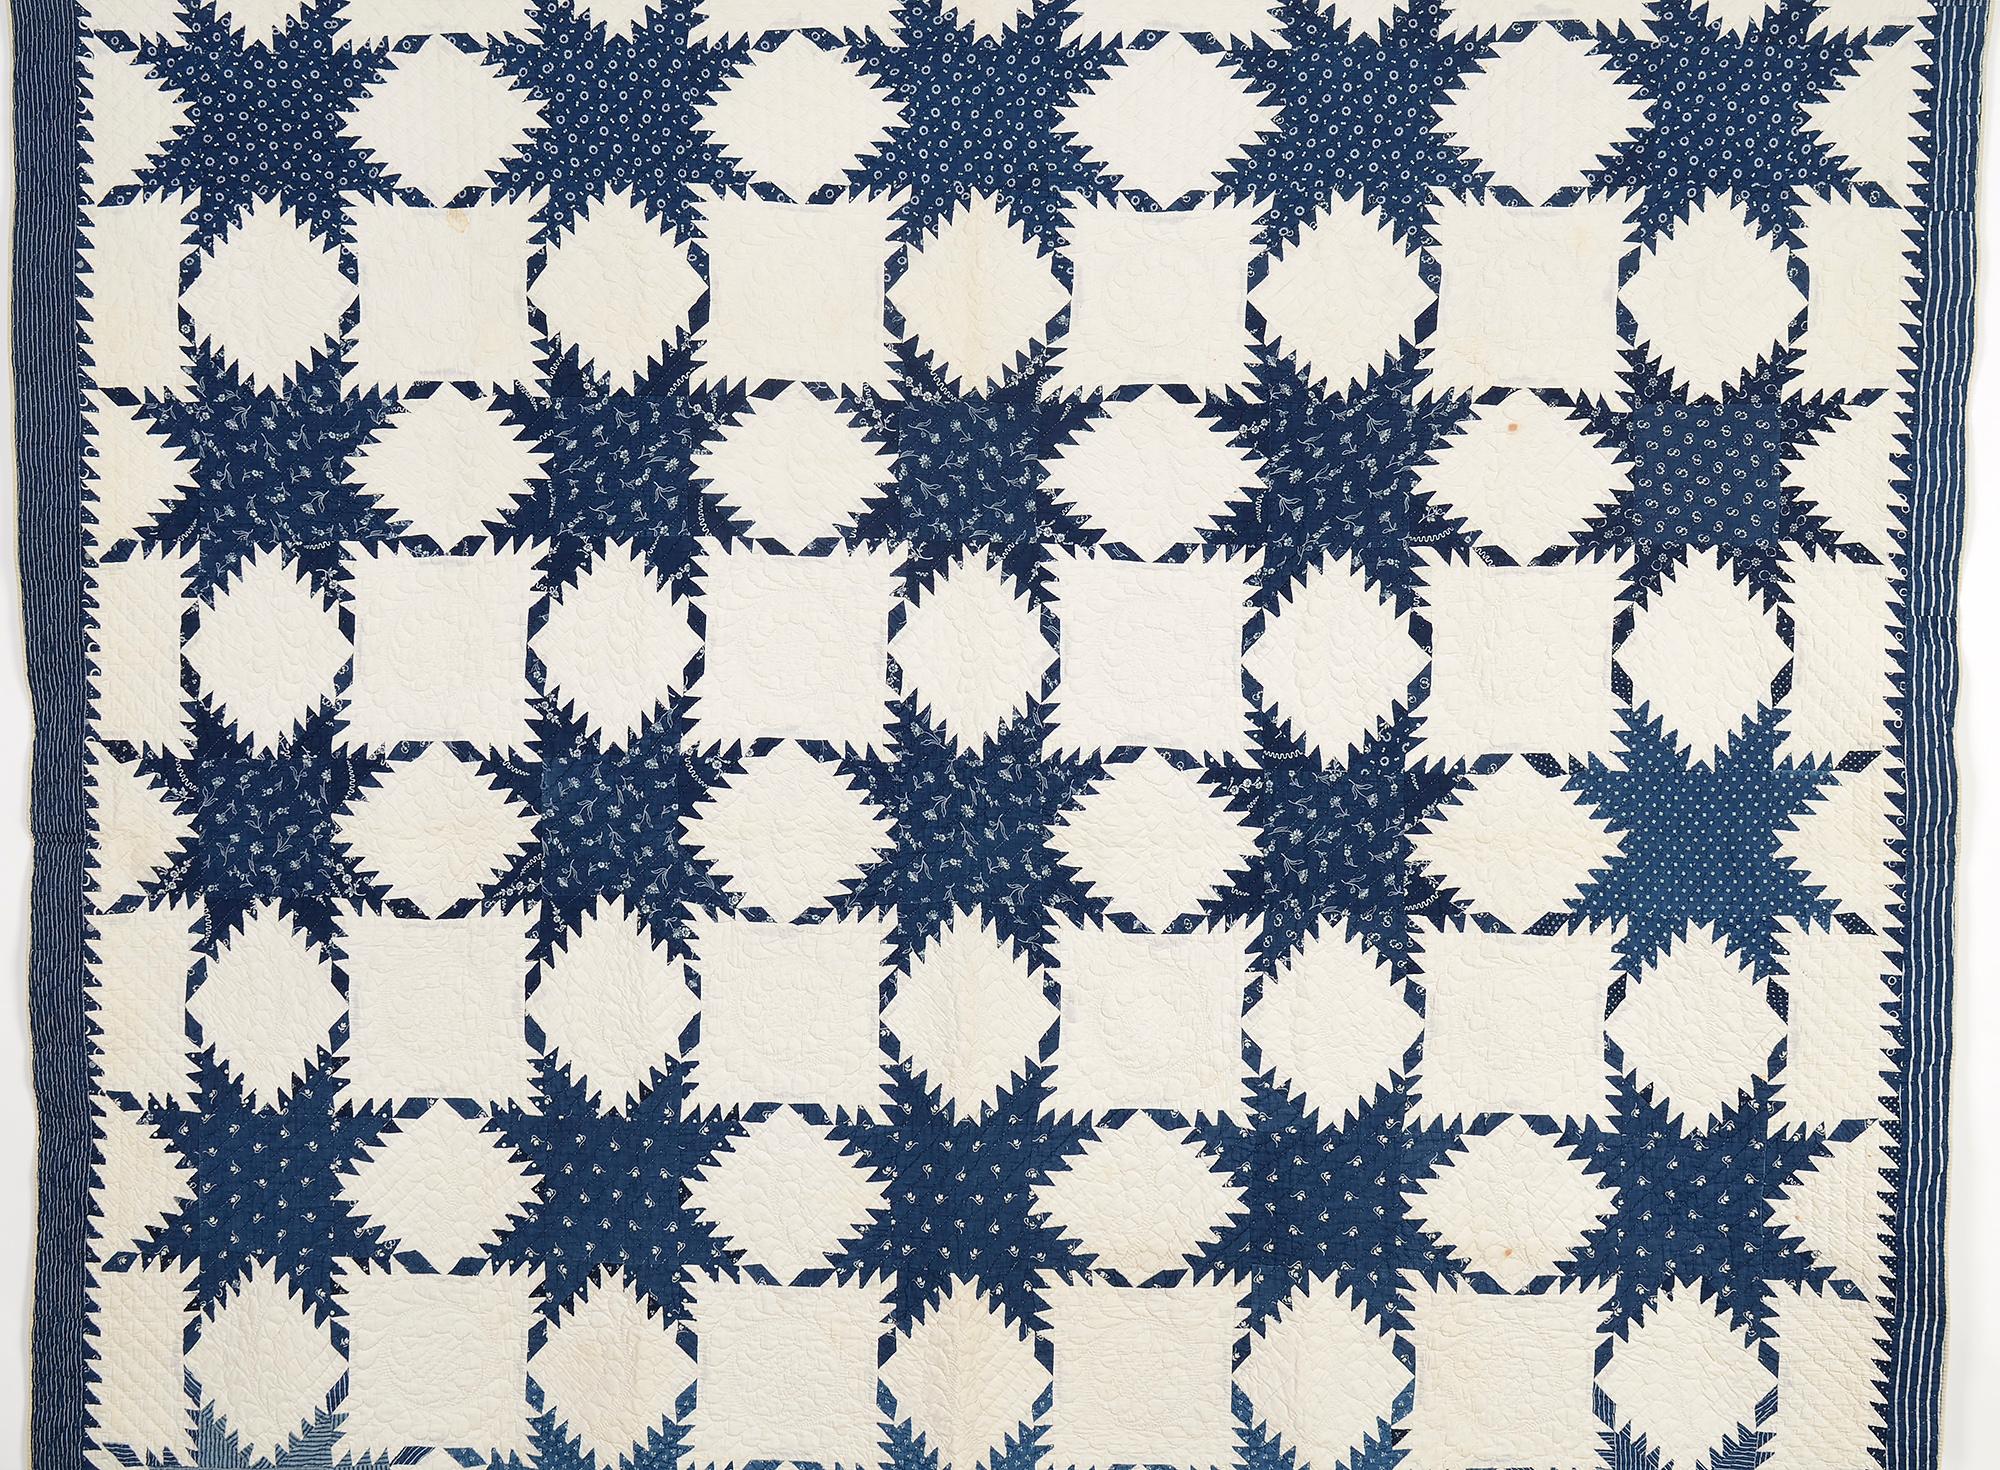 The pattern, quilting and fabrics all combine to make this Feathered Stars quilt an outstanding example. The twentyfive stars are surrounded by beautifully quilted wreaths and feathers in the white blocks. The stars are made of a variety of indigo